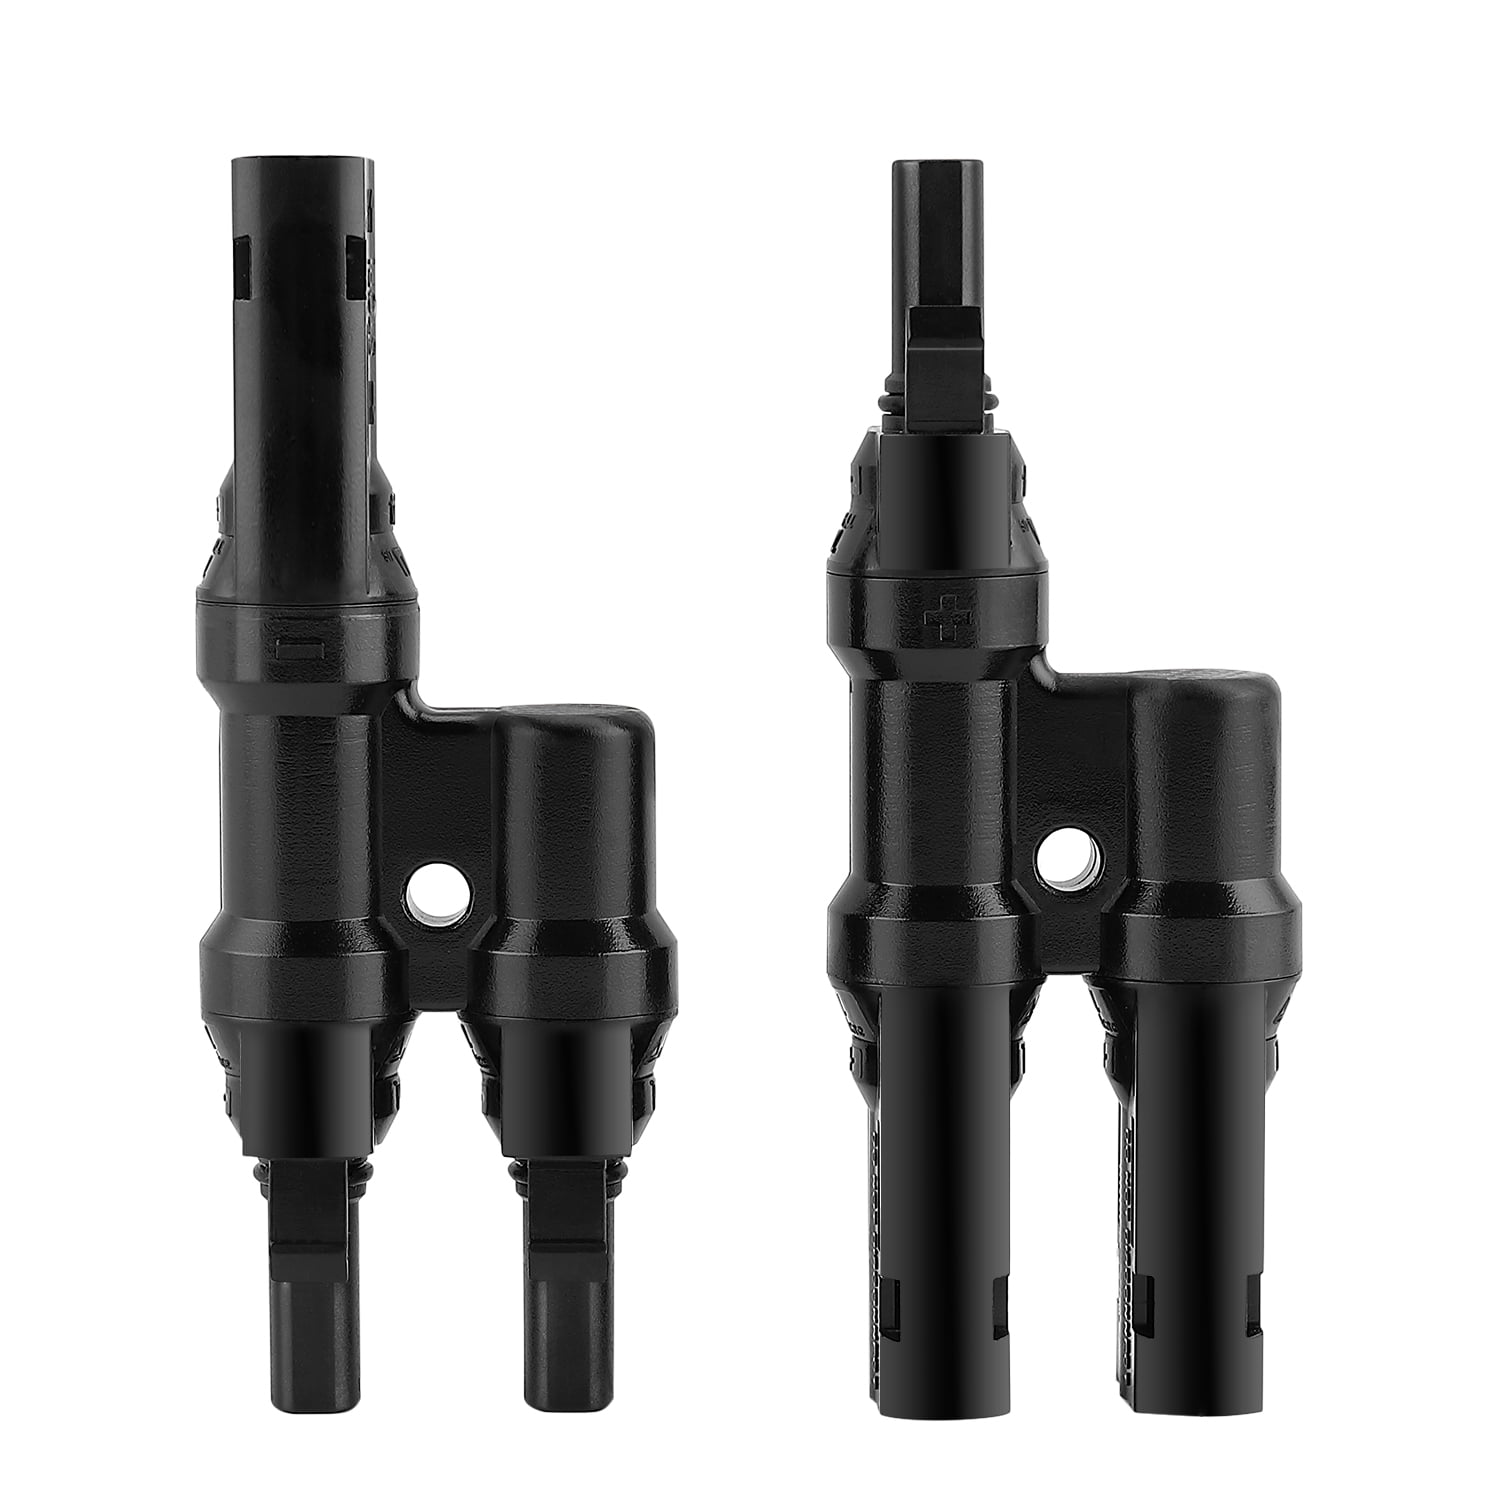 LINKPAL Branch Connectors Connectors Y Connector in Pair MMF+FFM for  Parallel Connection Between Solar Panels … (1 Pair) • Solar Power Shop